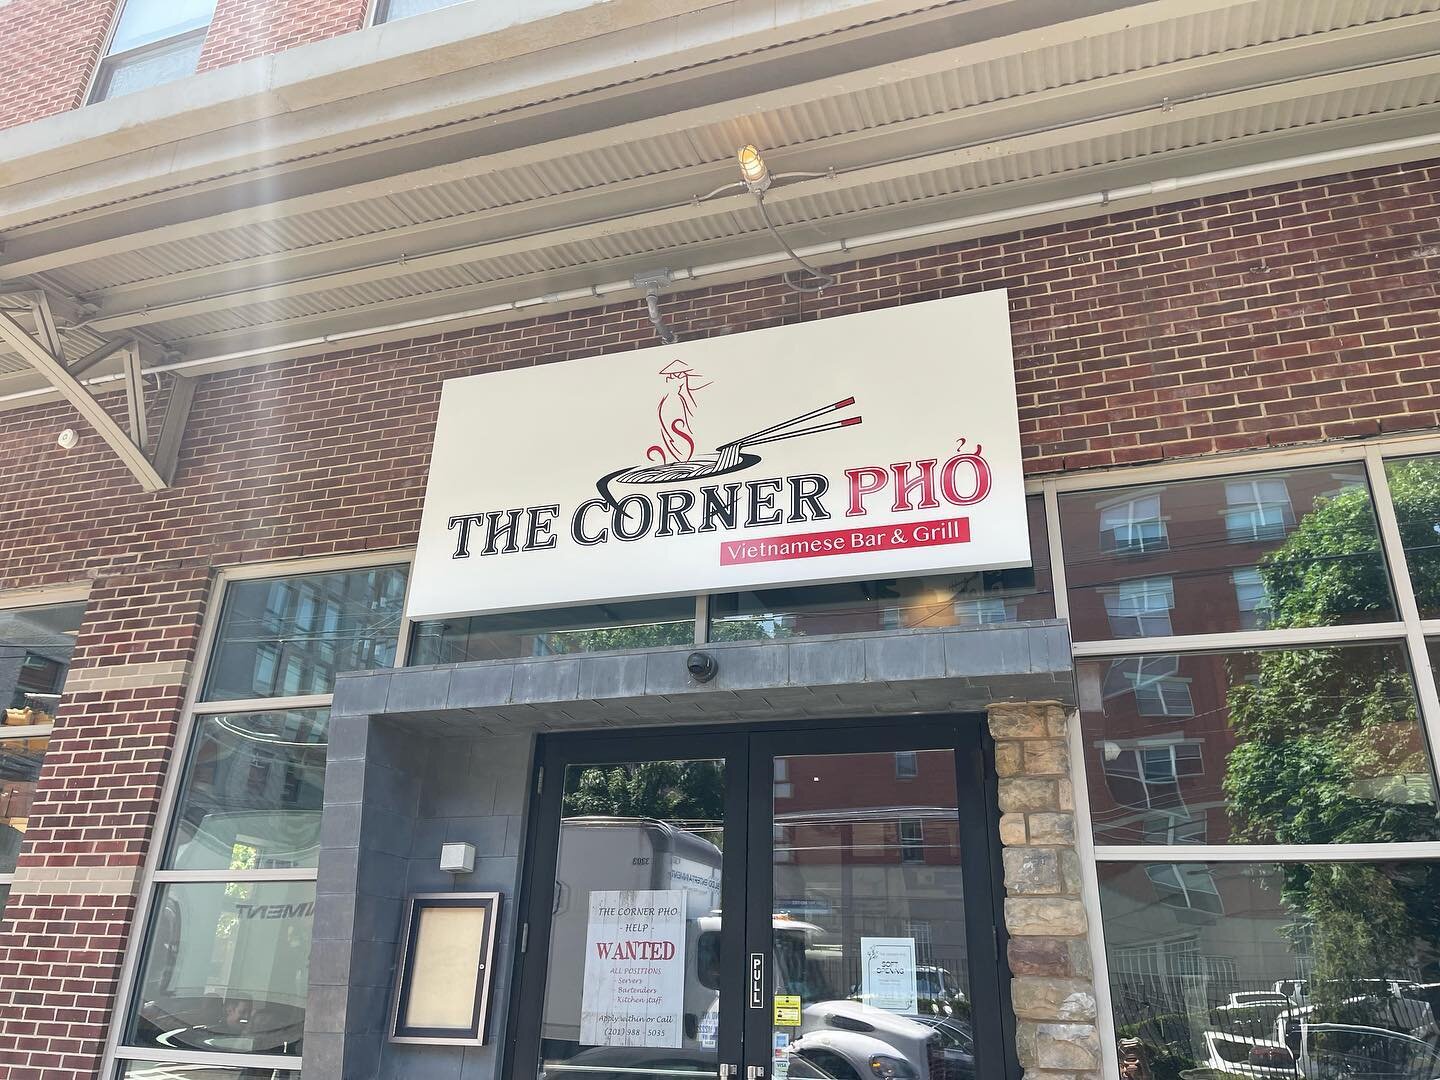 Today, we welcomed our new sign! Along with that is a few pictures of some food and drink items off our menu. Can&rsquo;t wait for everyone to join us and enjoy our food! #newrestaurant #vietnamesefood #pho #jerseycity